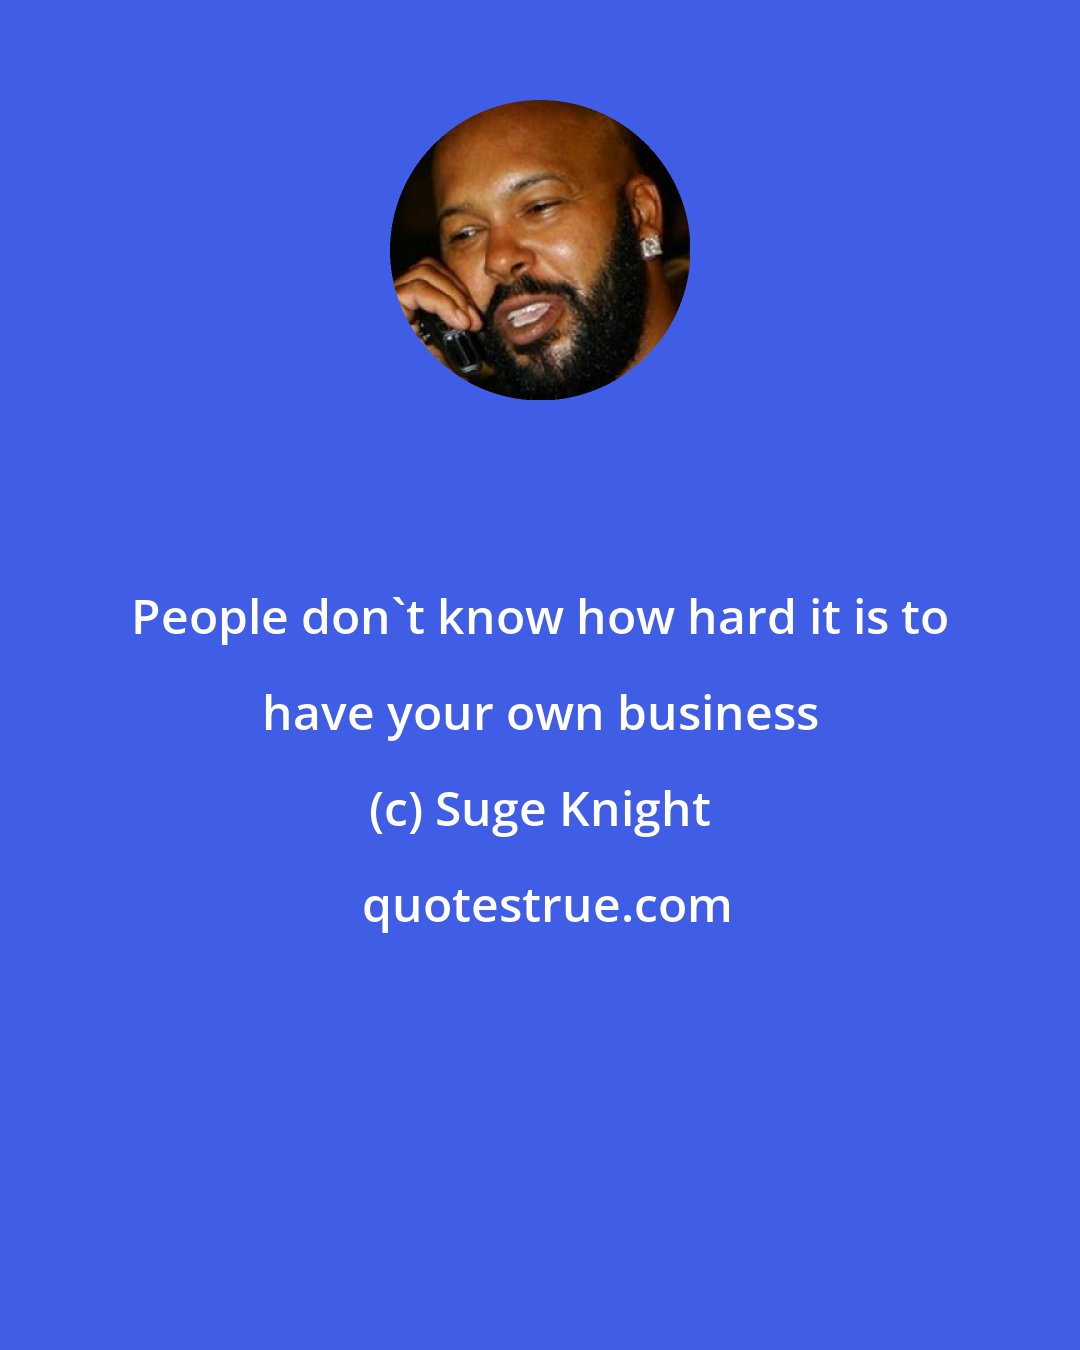 Suge Knight: People don't know how hard it is to have your own business